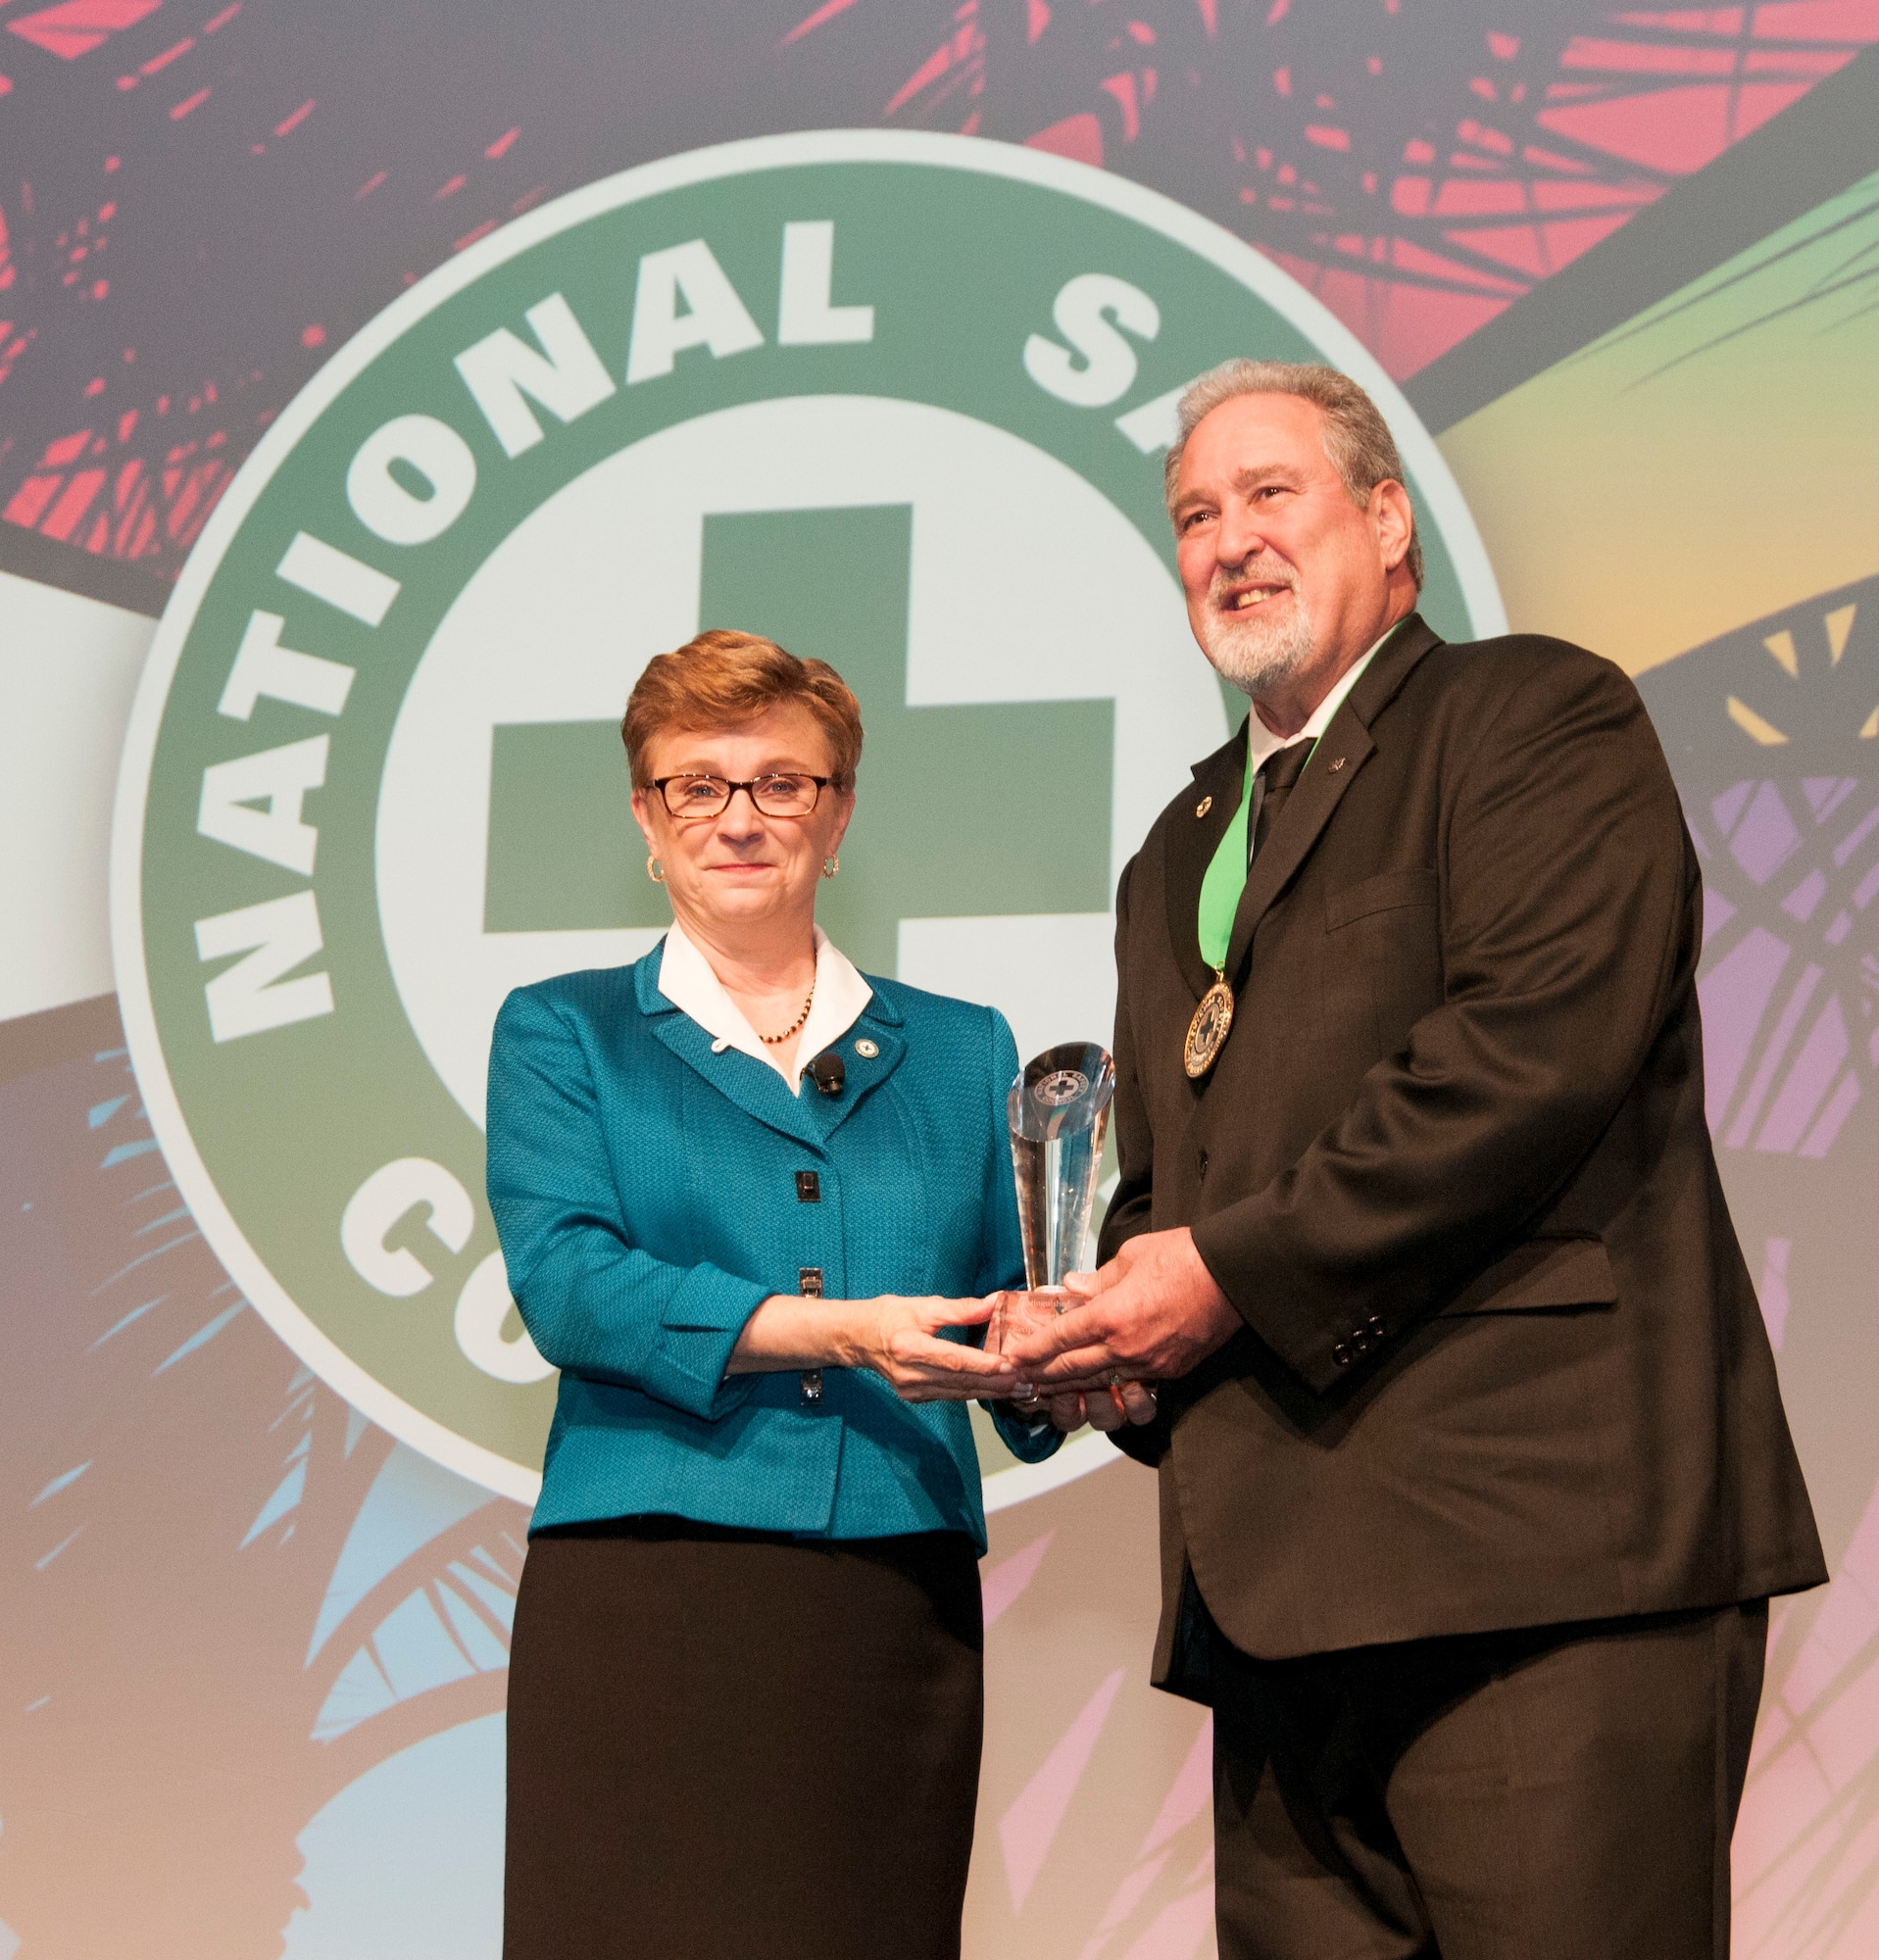 Michael Ballard, Air Force Safety Center's acting chief of operational safety division, received the National Safety Council's highest award, the Distinguished Service to Safety Award, Sept. 9 during the opening session of the NSC's 2019 Congress & Expo.